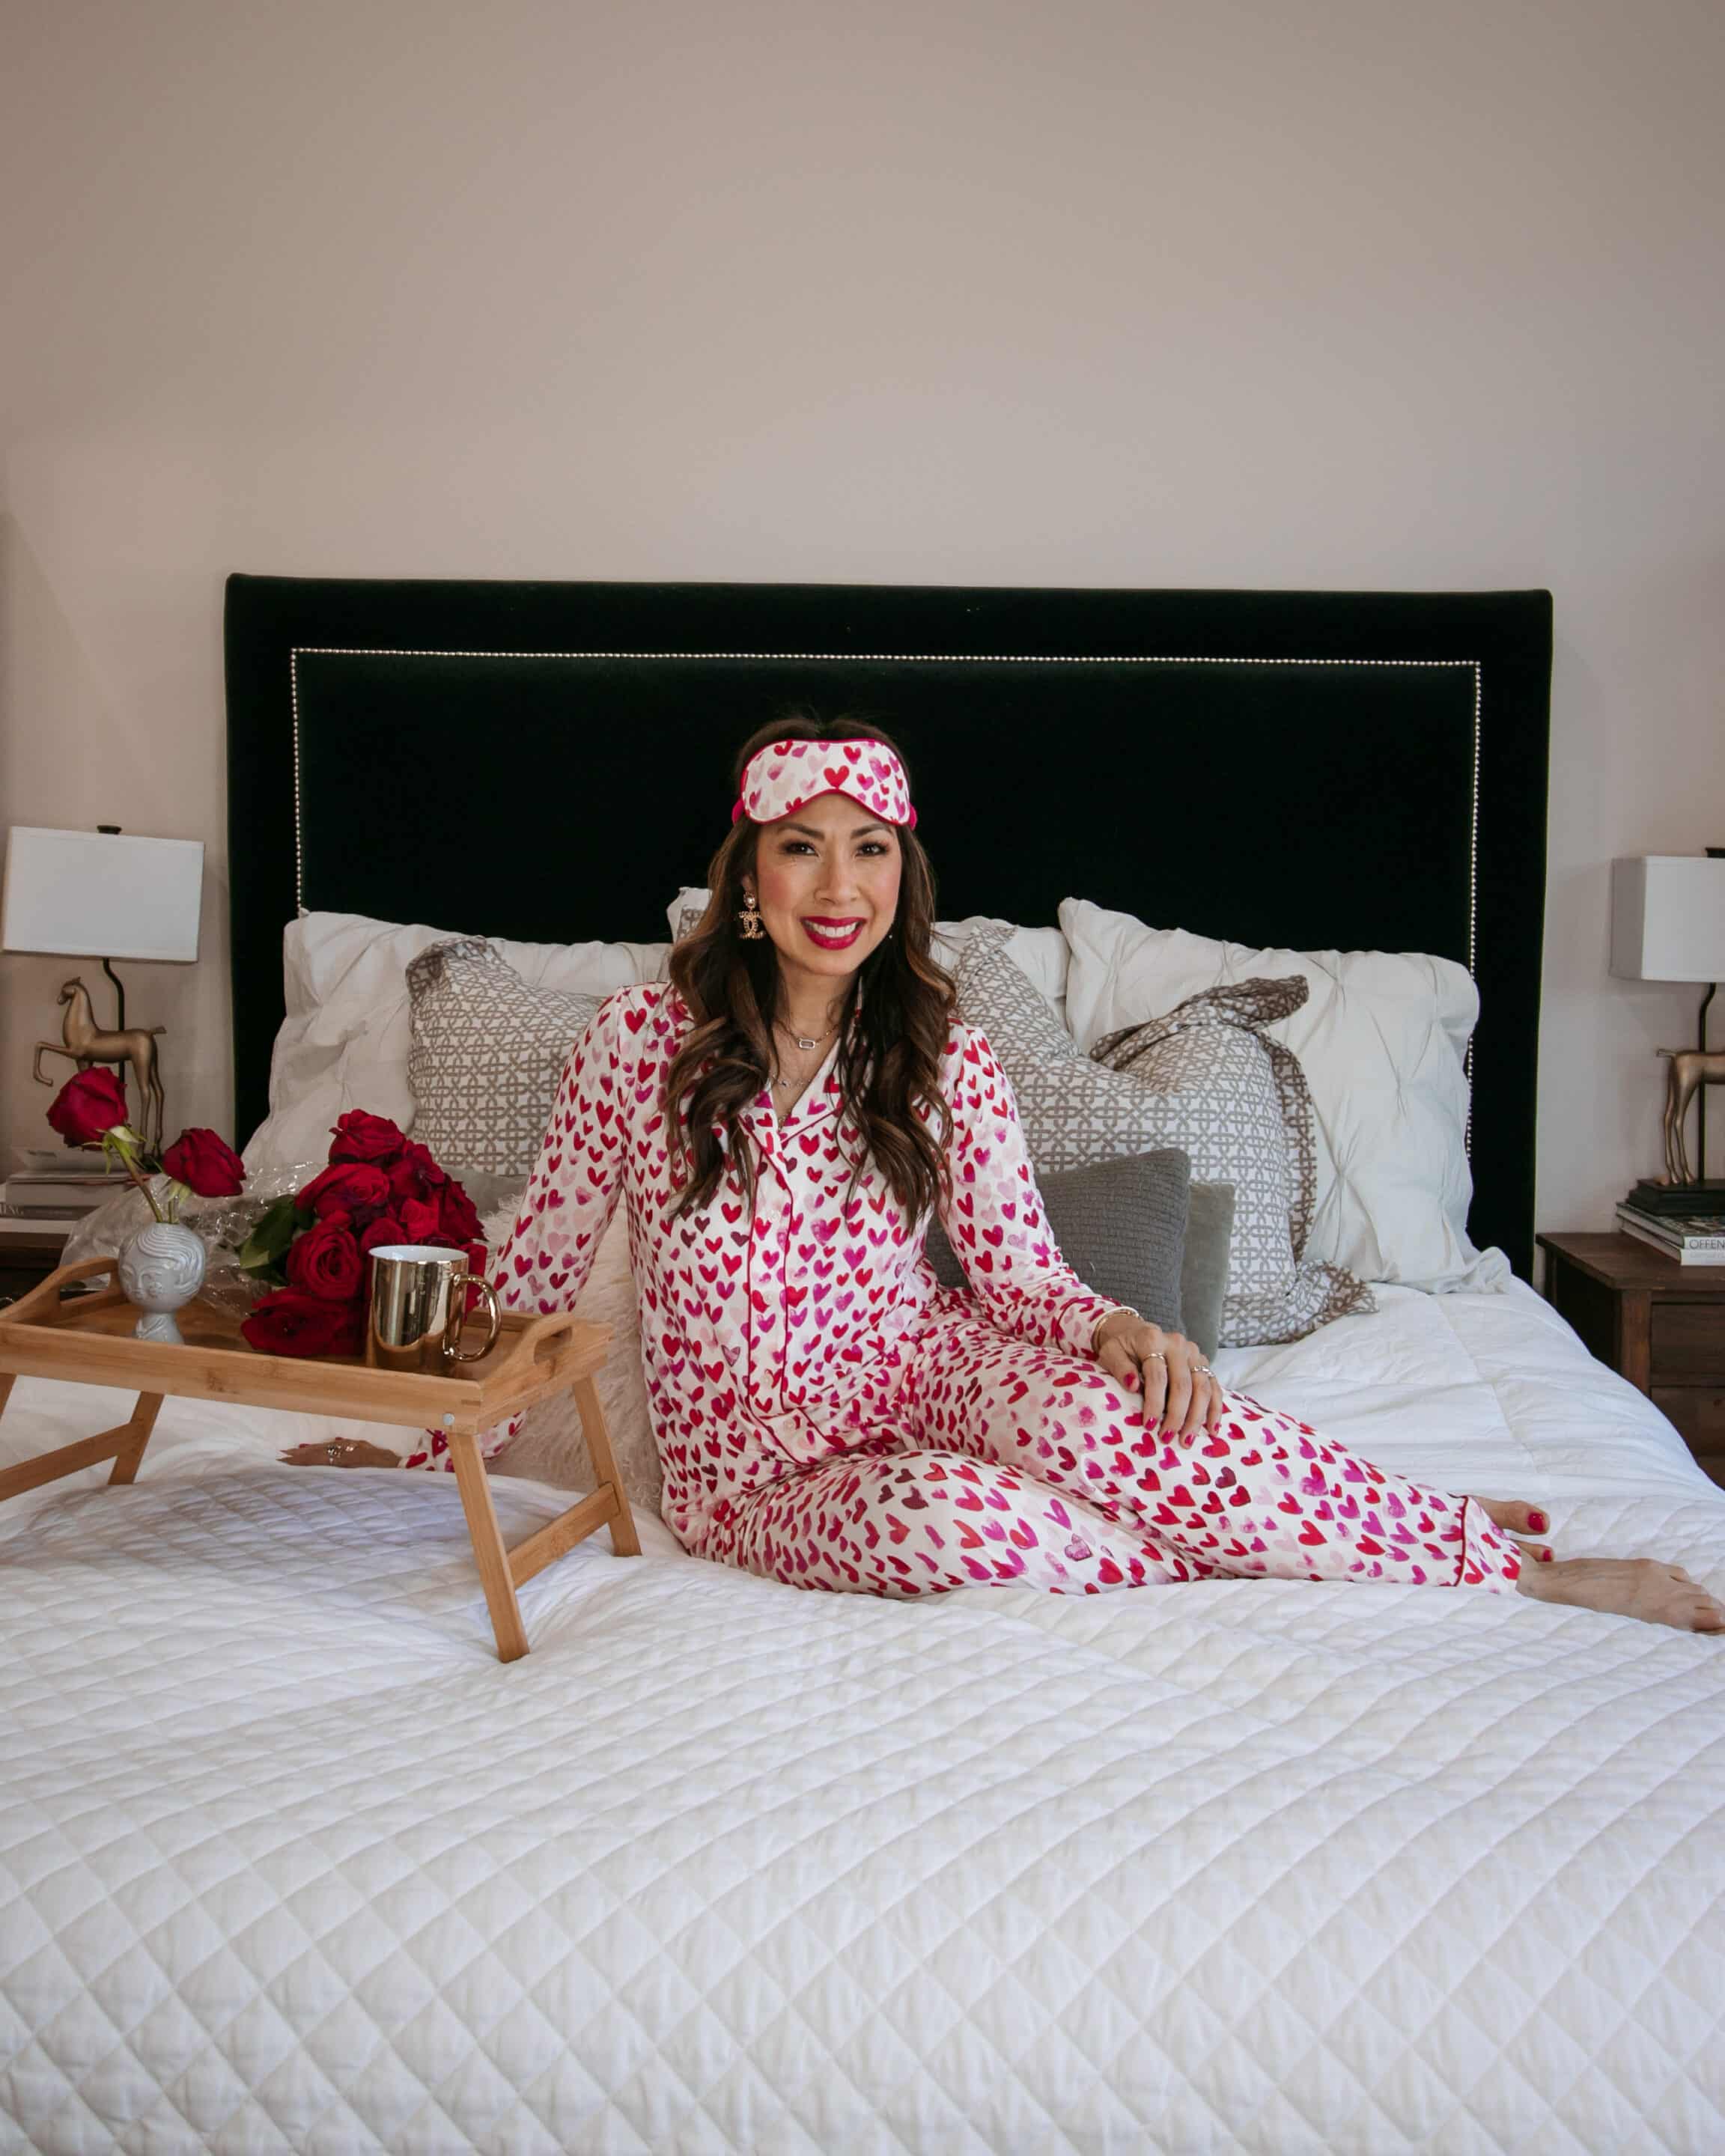 style of sam in soma heart pajamas and matching sleeping mask, valentine's day outfit idea